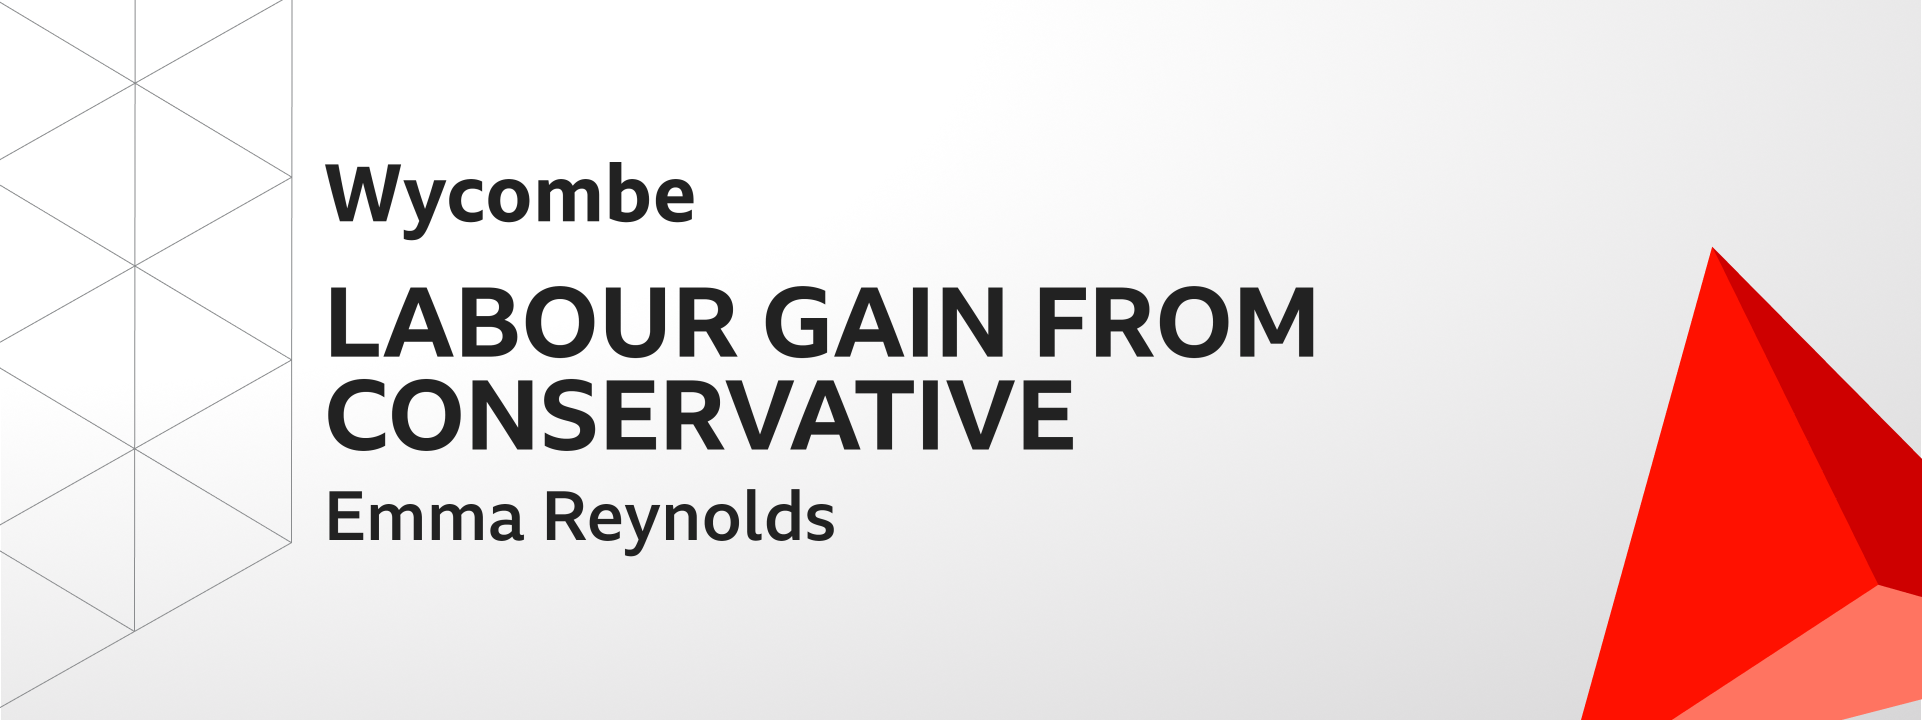 Graphic showing Labour gains Wycombe from the Conservatives. The winning candidate was Emma Reynolds.